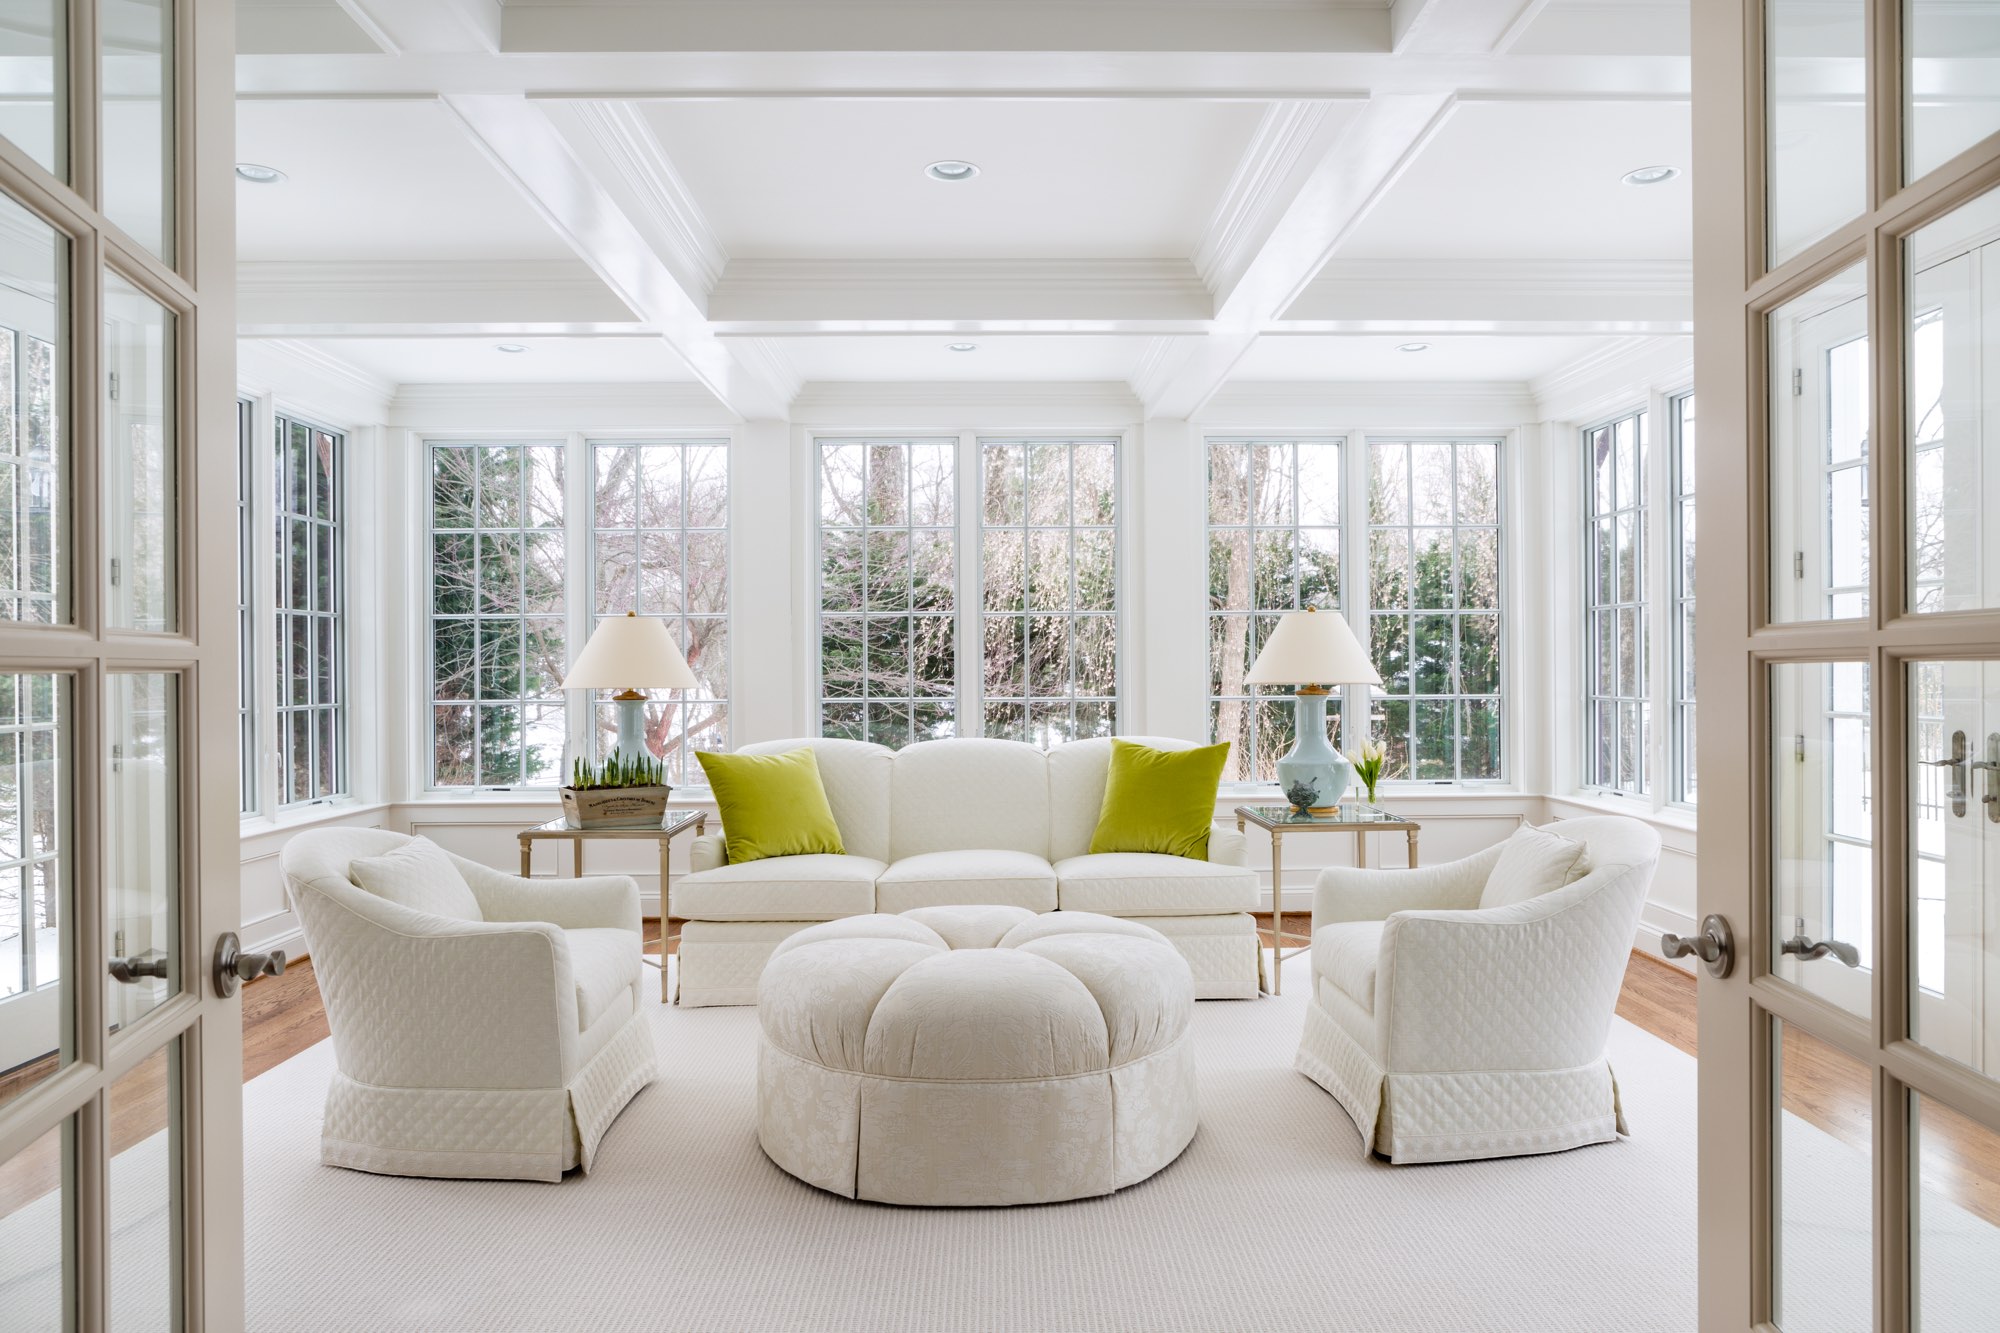 Home sunroom renovation with soffit ceiling, white furniture, white windowpanes and view of snowy landscape